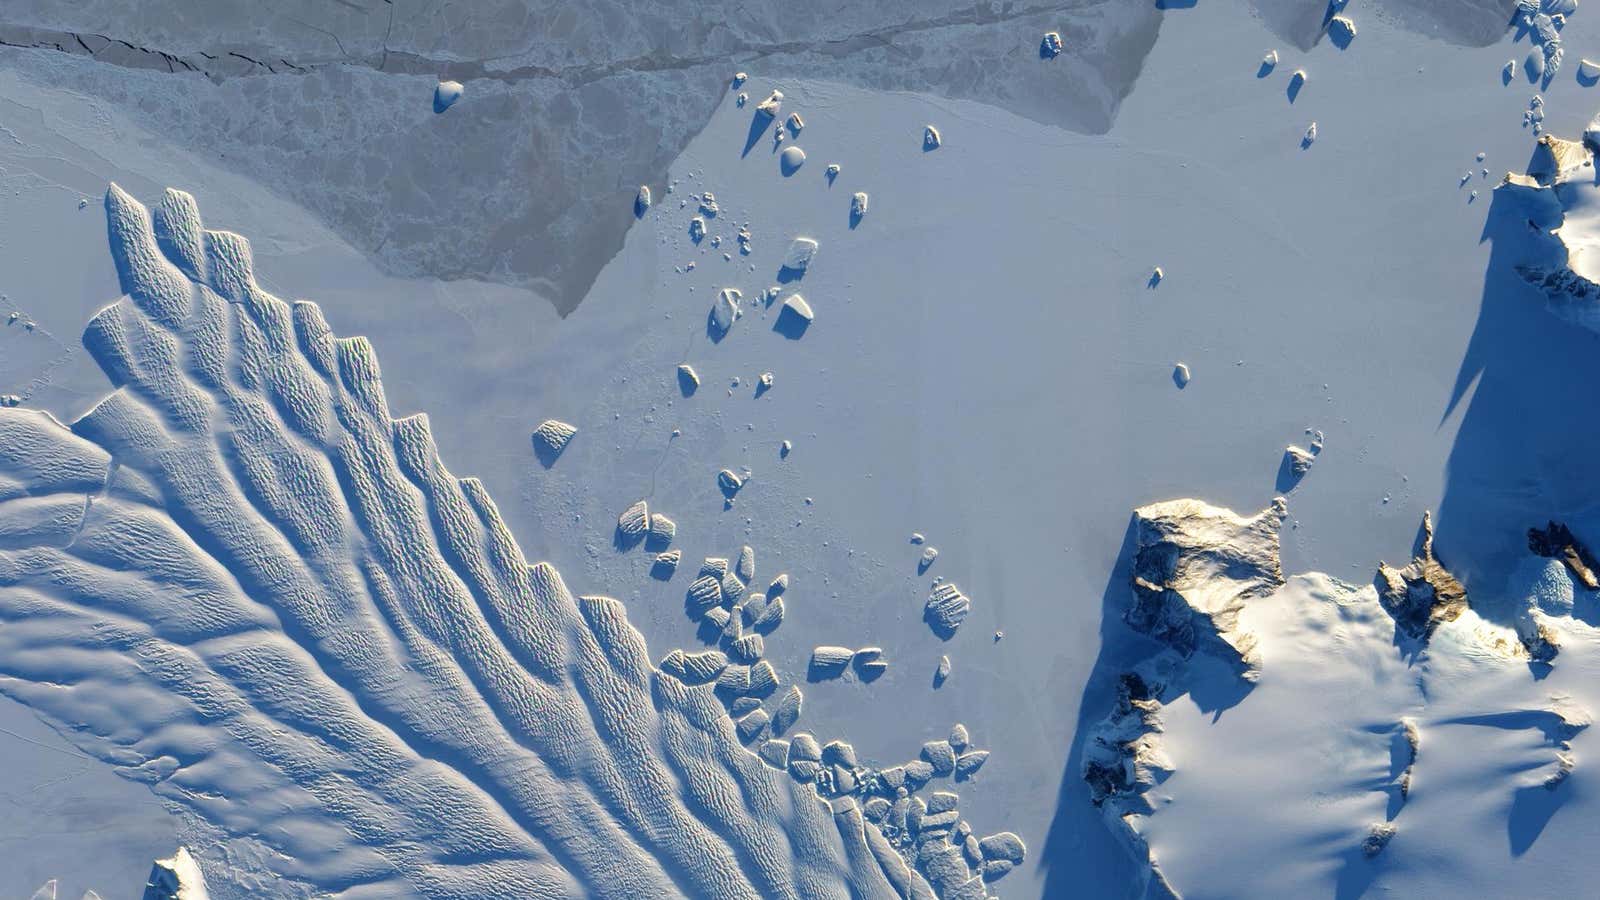 The Matusevich glacier in Antarctica, seen by the EO-1 satellite in 2010.